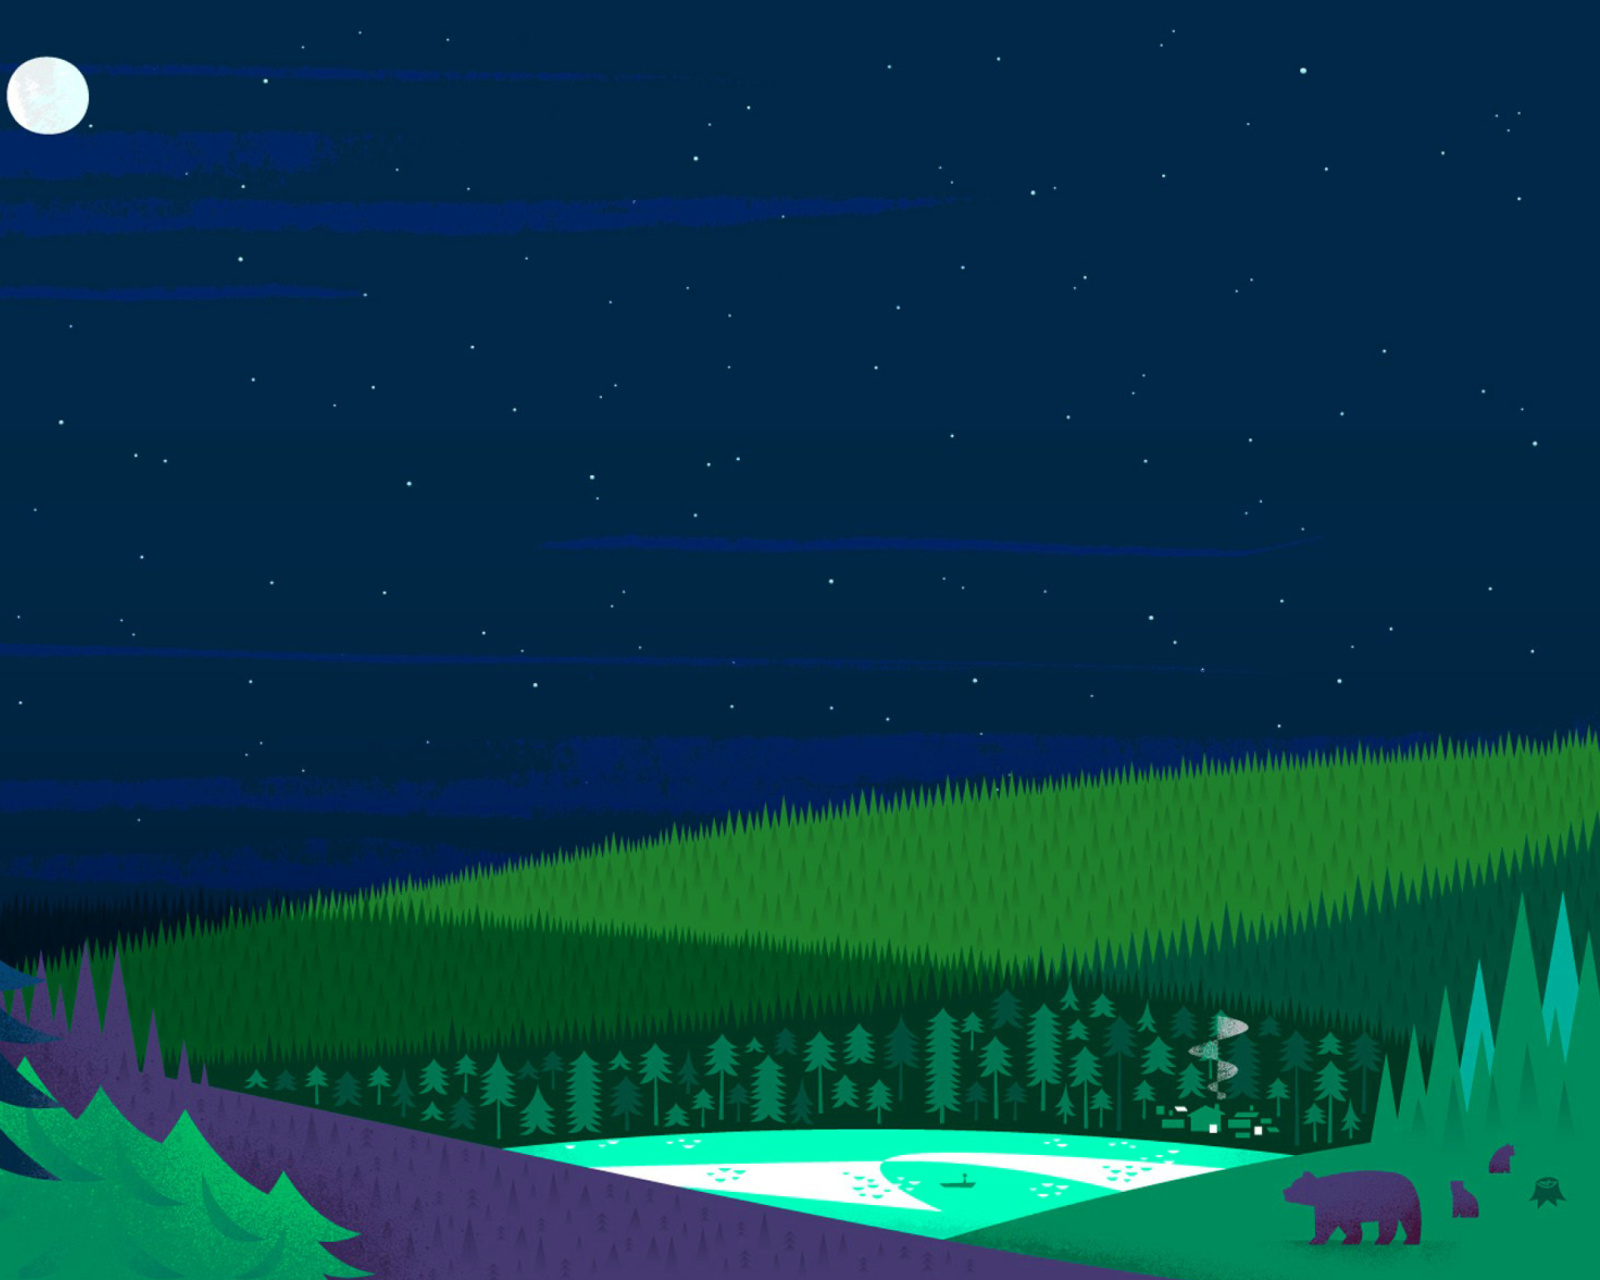 Graphics night and bears in forest wallpaper 1600x1280